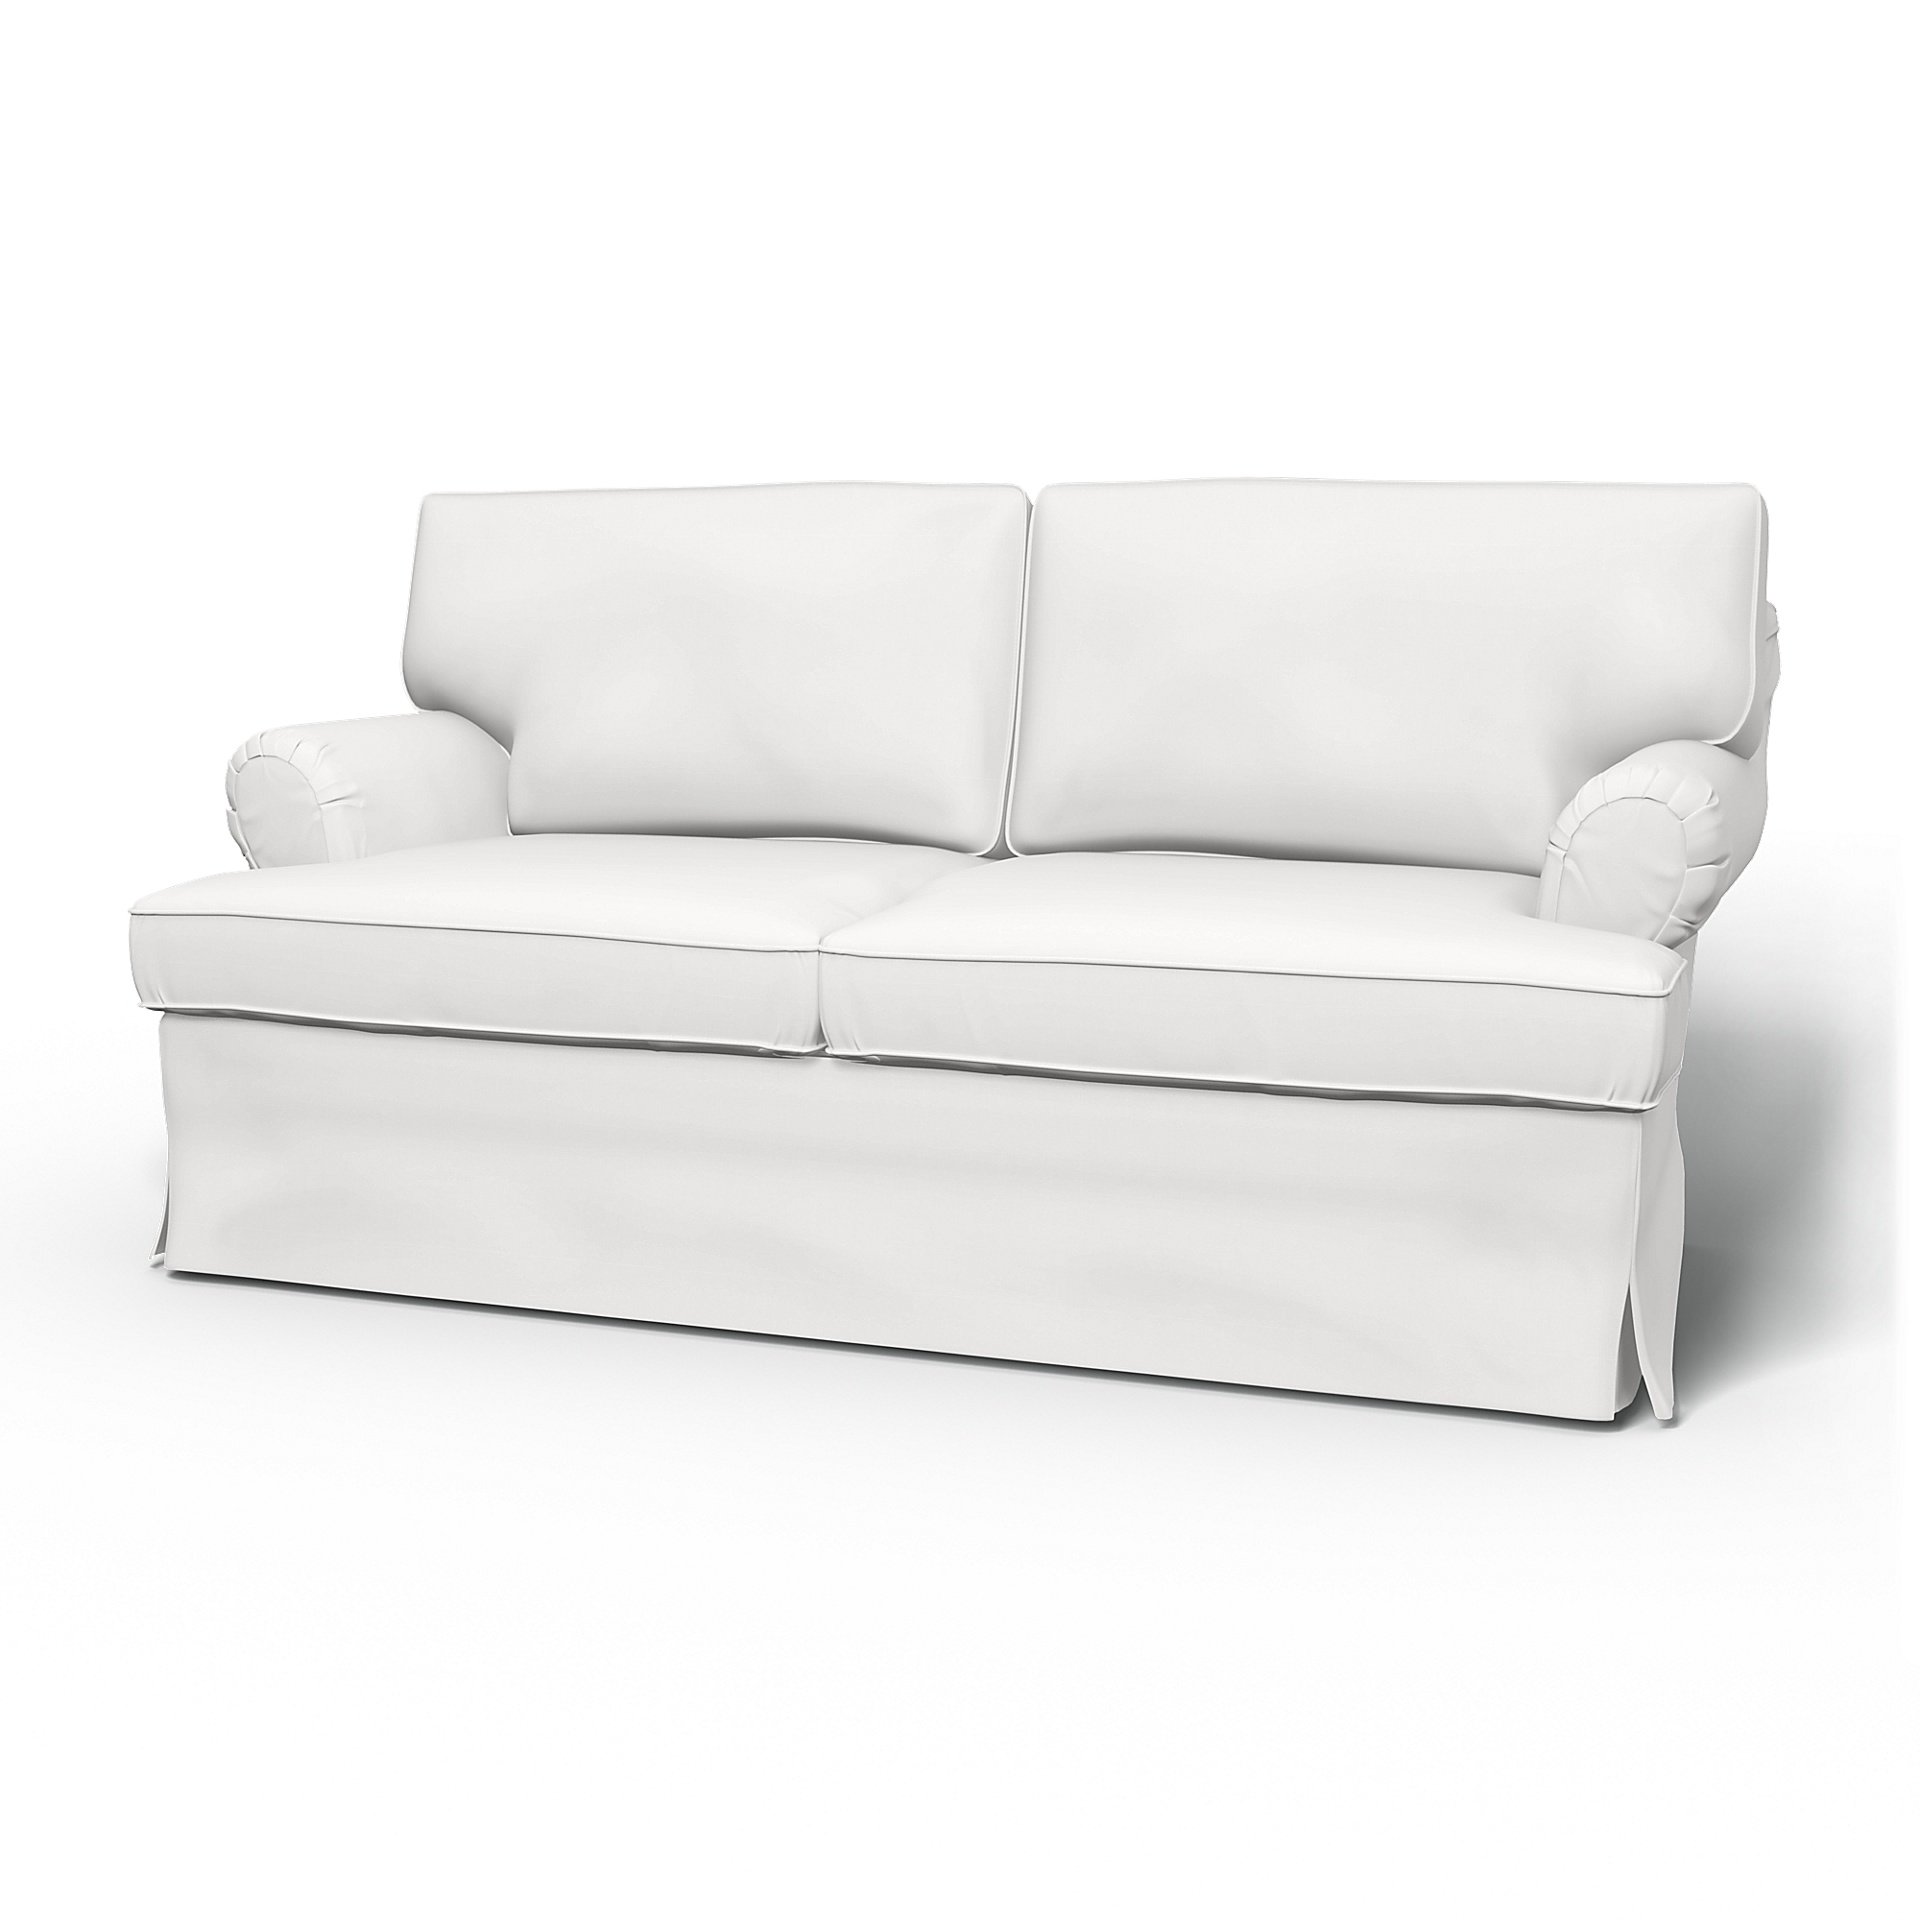 IKEA - Stockholm 2 Seater Sofa Cover (1994-2000), Absolute White, Cotton - Bemz